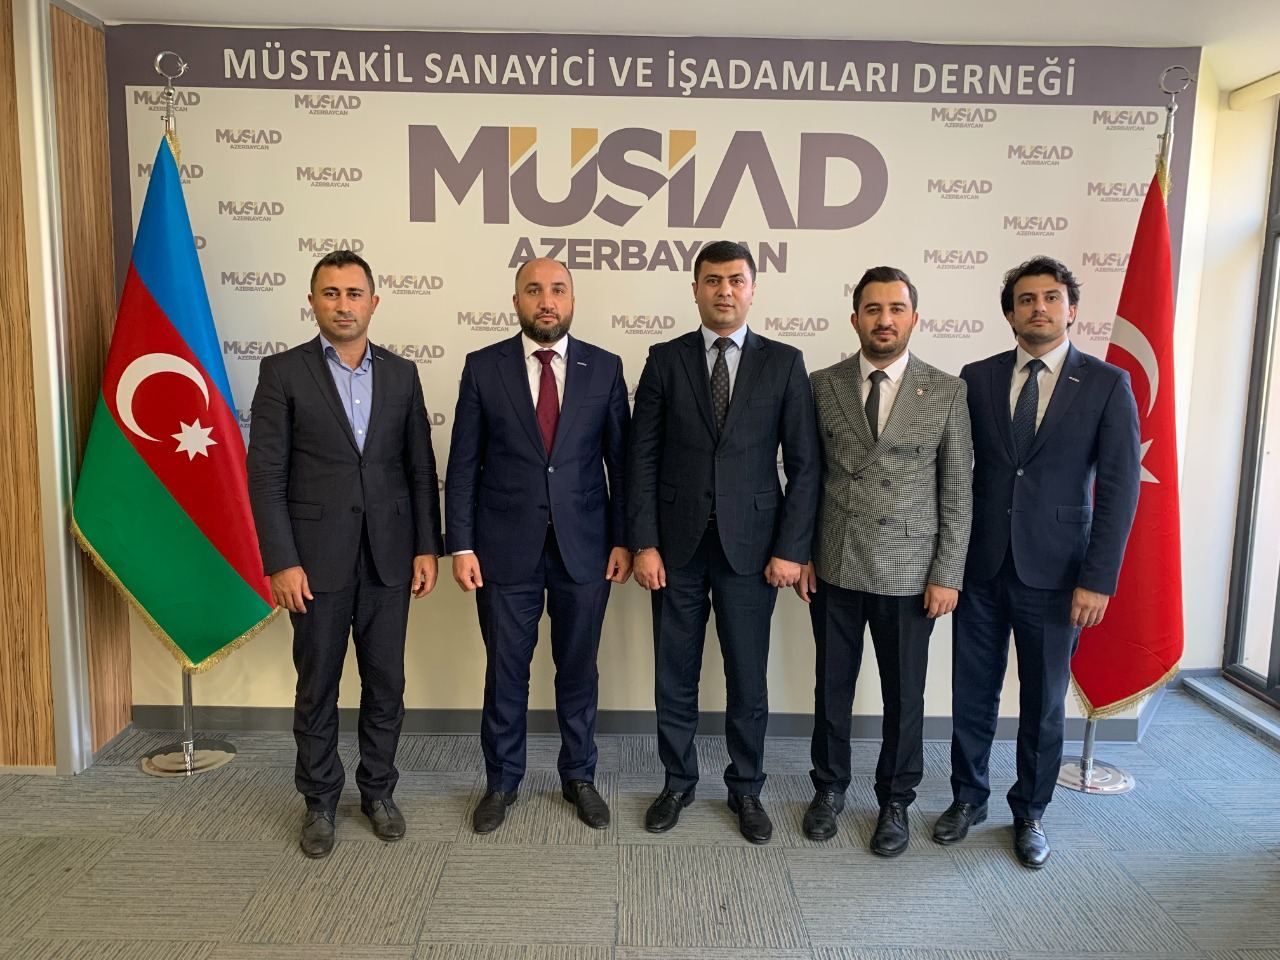 MUSIAD Azеrbaijan discusses cooperation with several structures